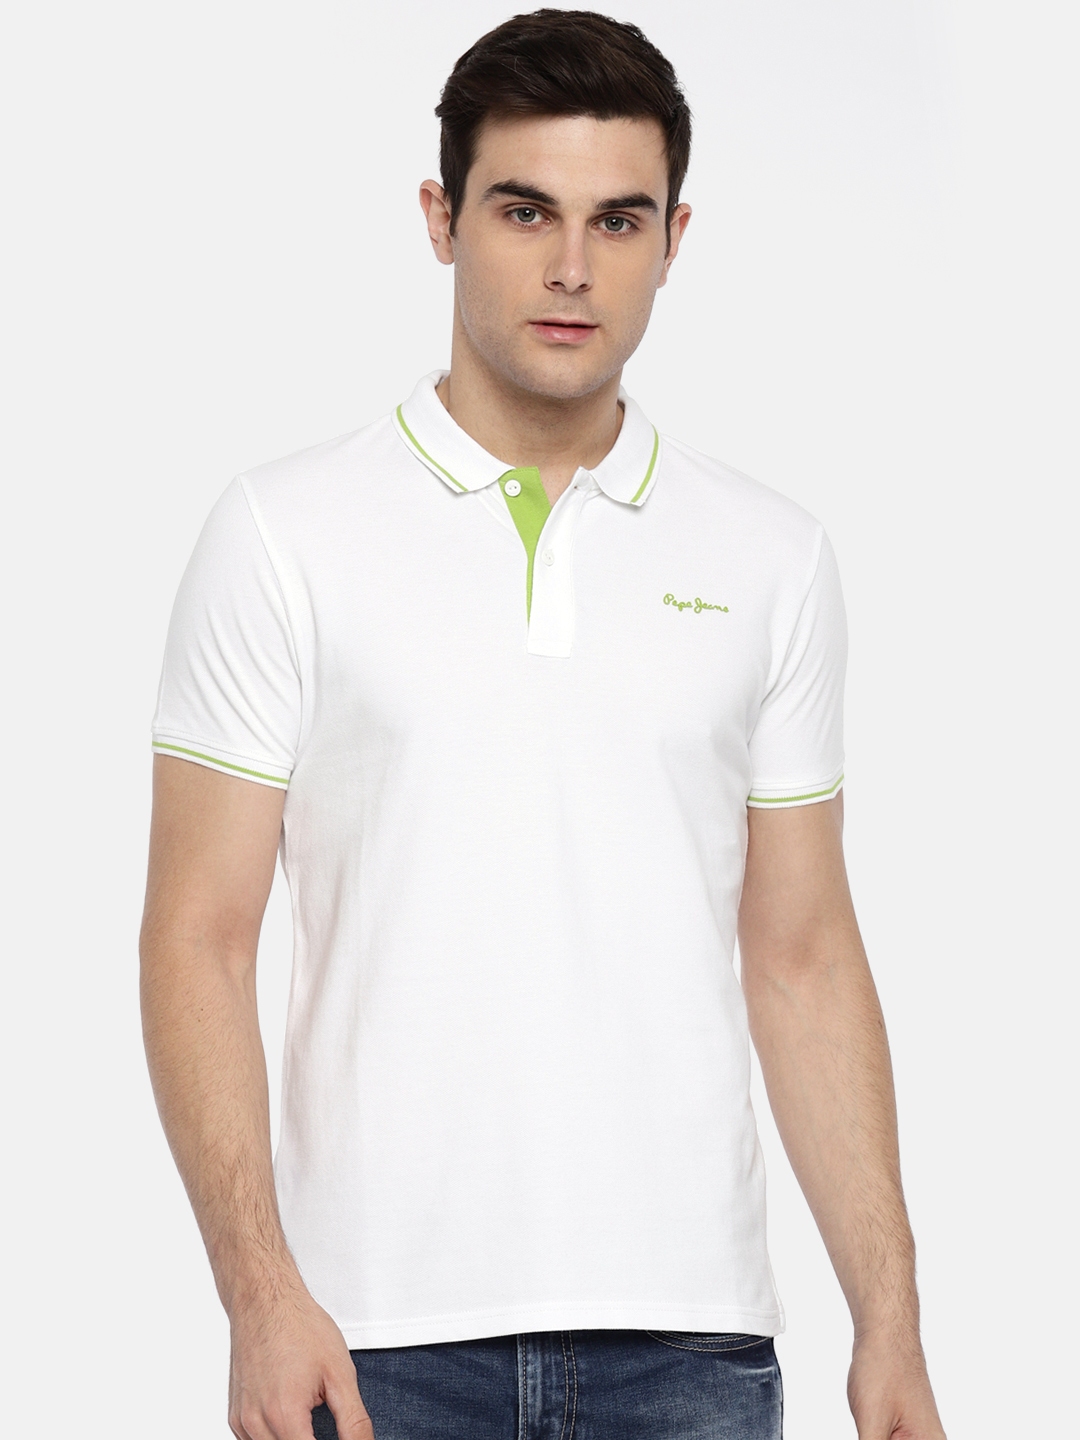 for Pure | Shirt Tshirts Men Collar Cotton Jeans - Buy Men Polo T 8340965 Solid White Pepe Myntra